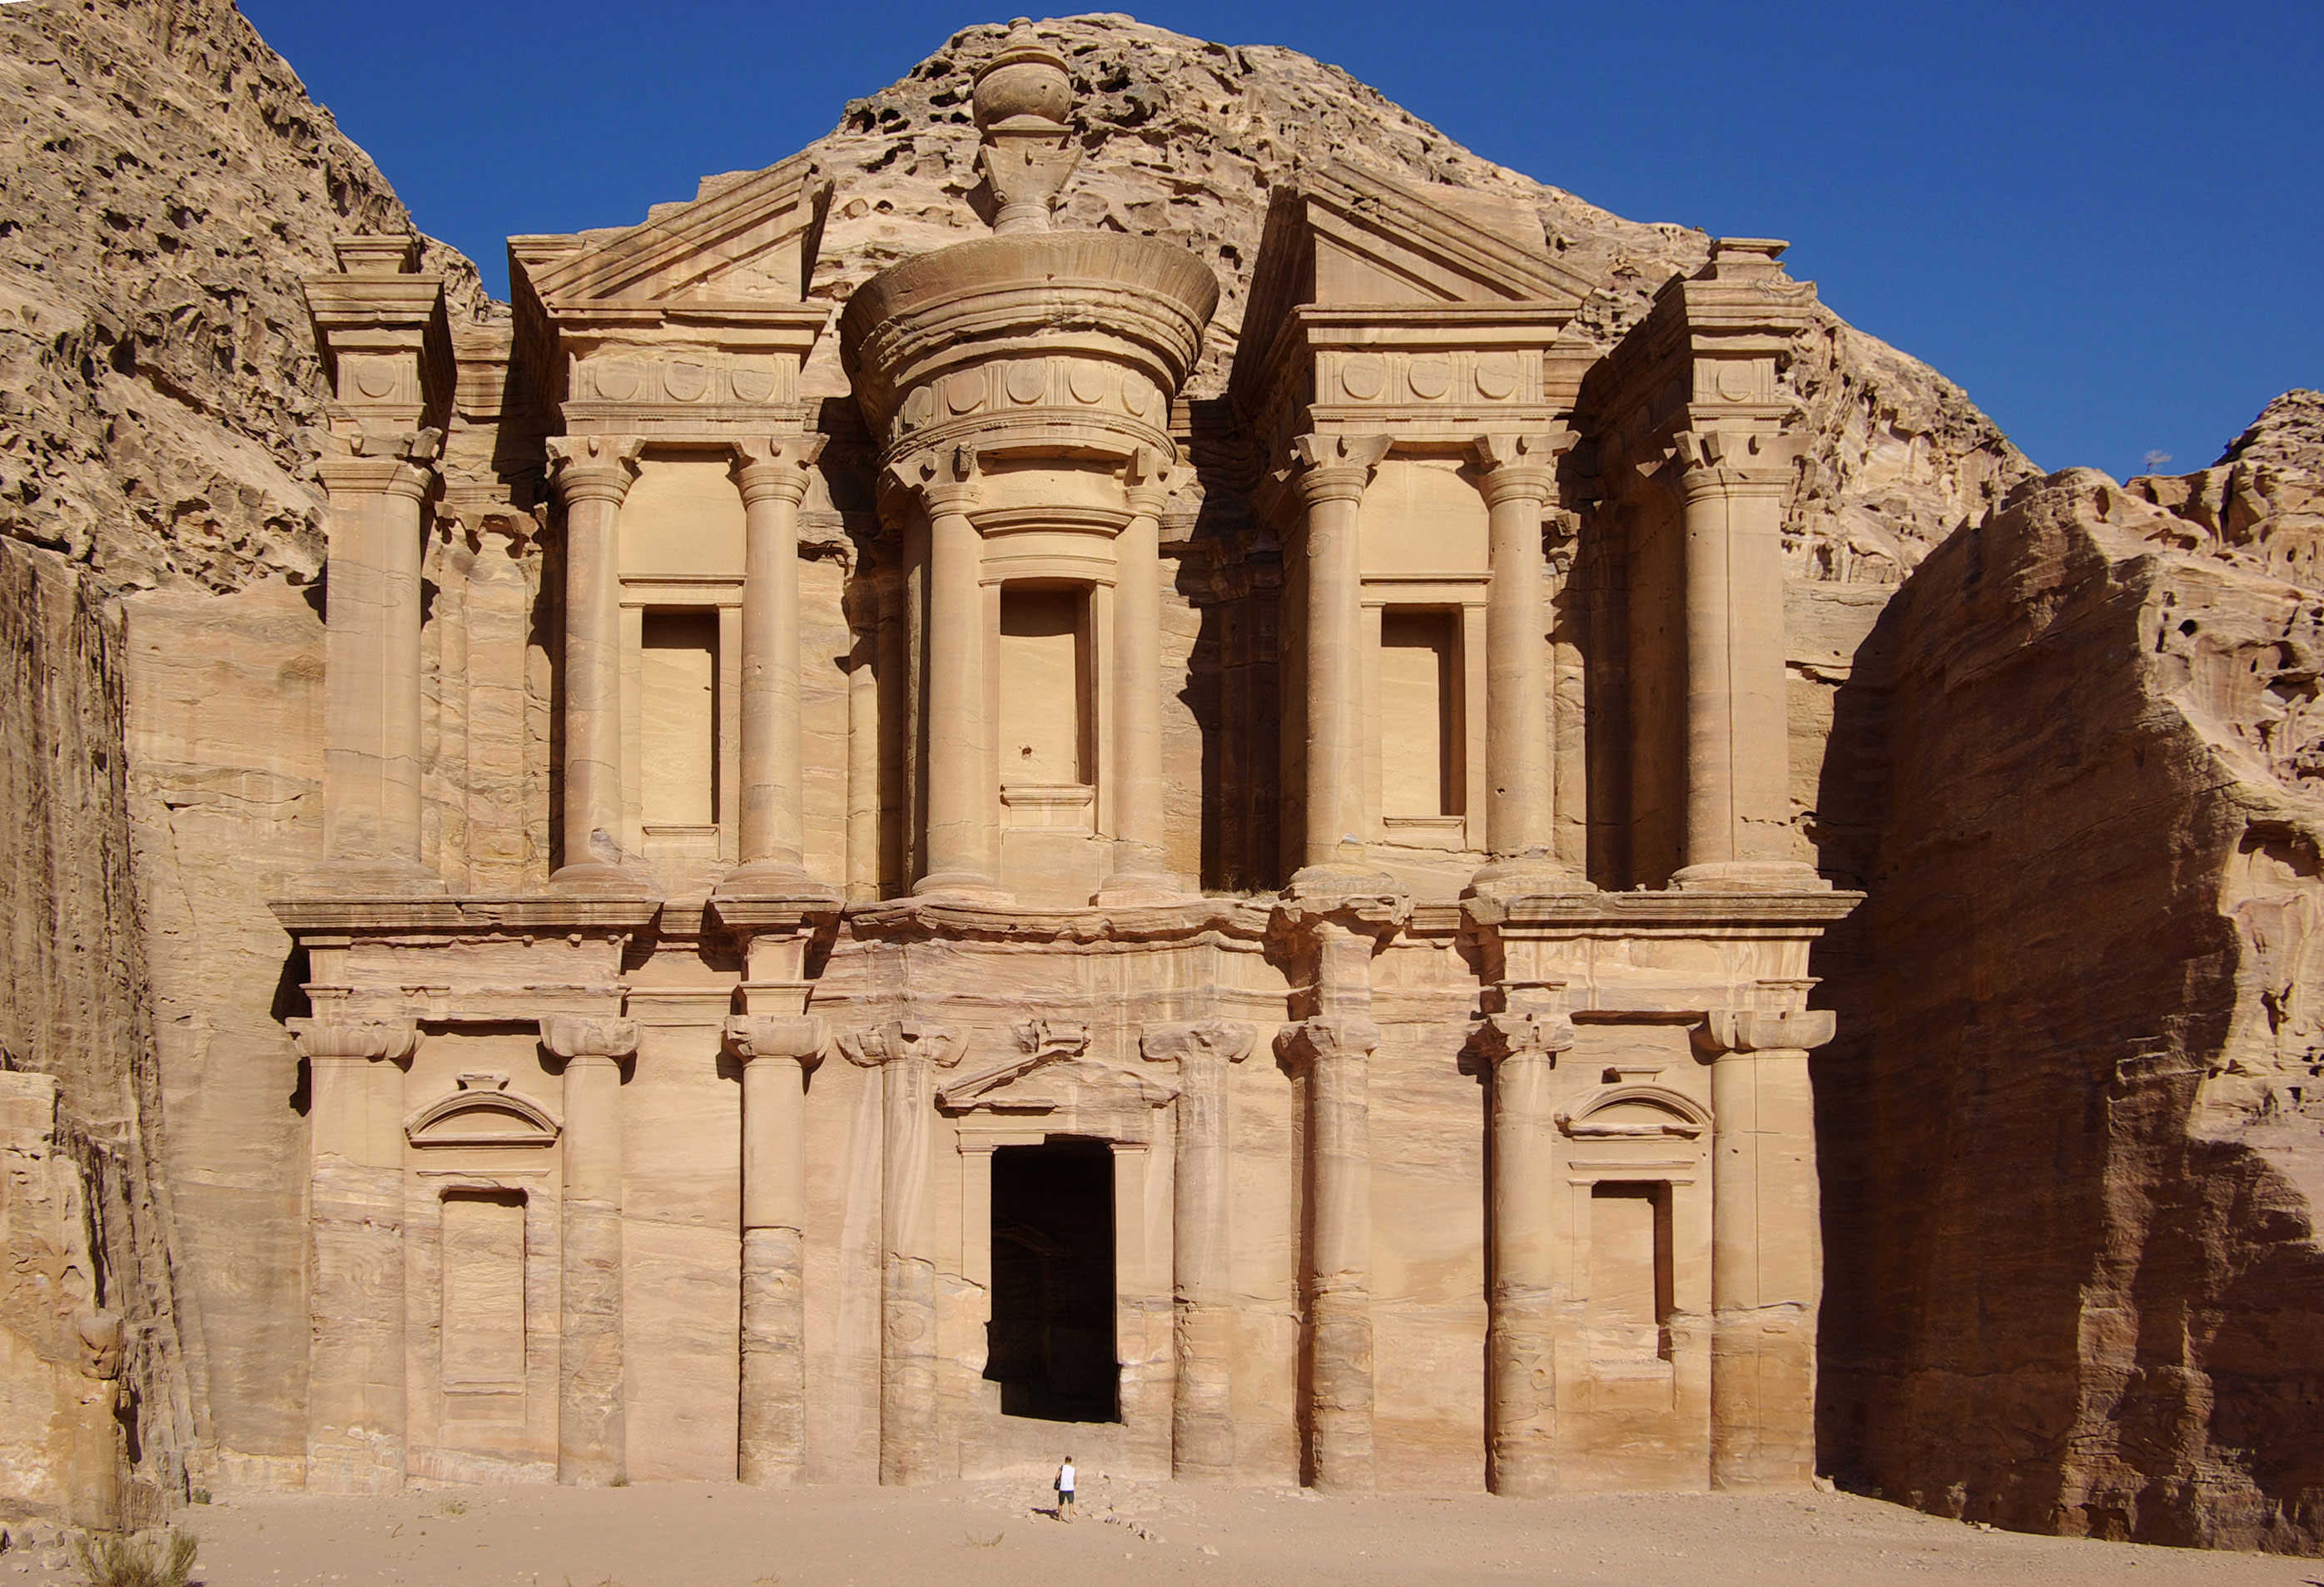 El Deir (The Monastery) dates back to the 1st century, BC